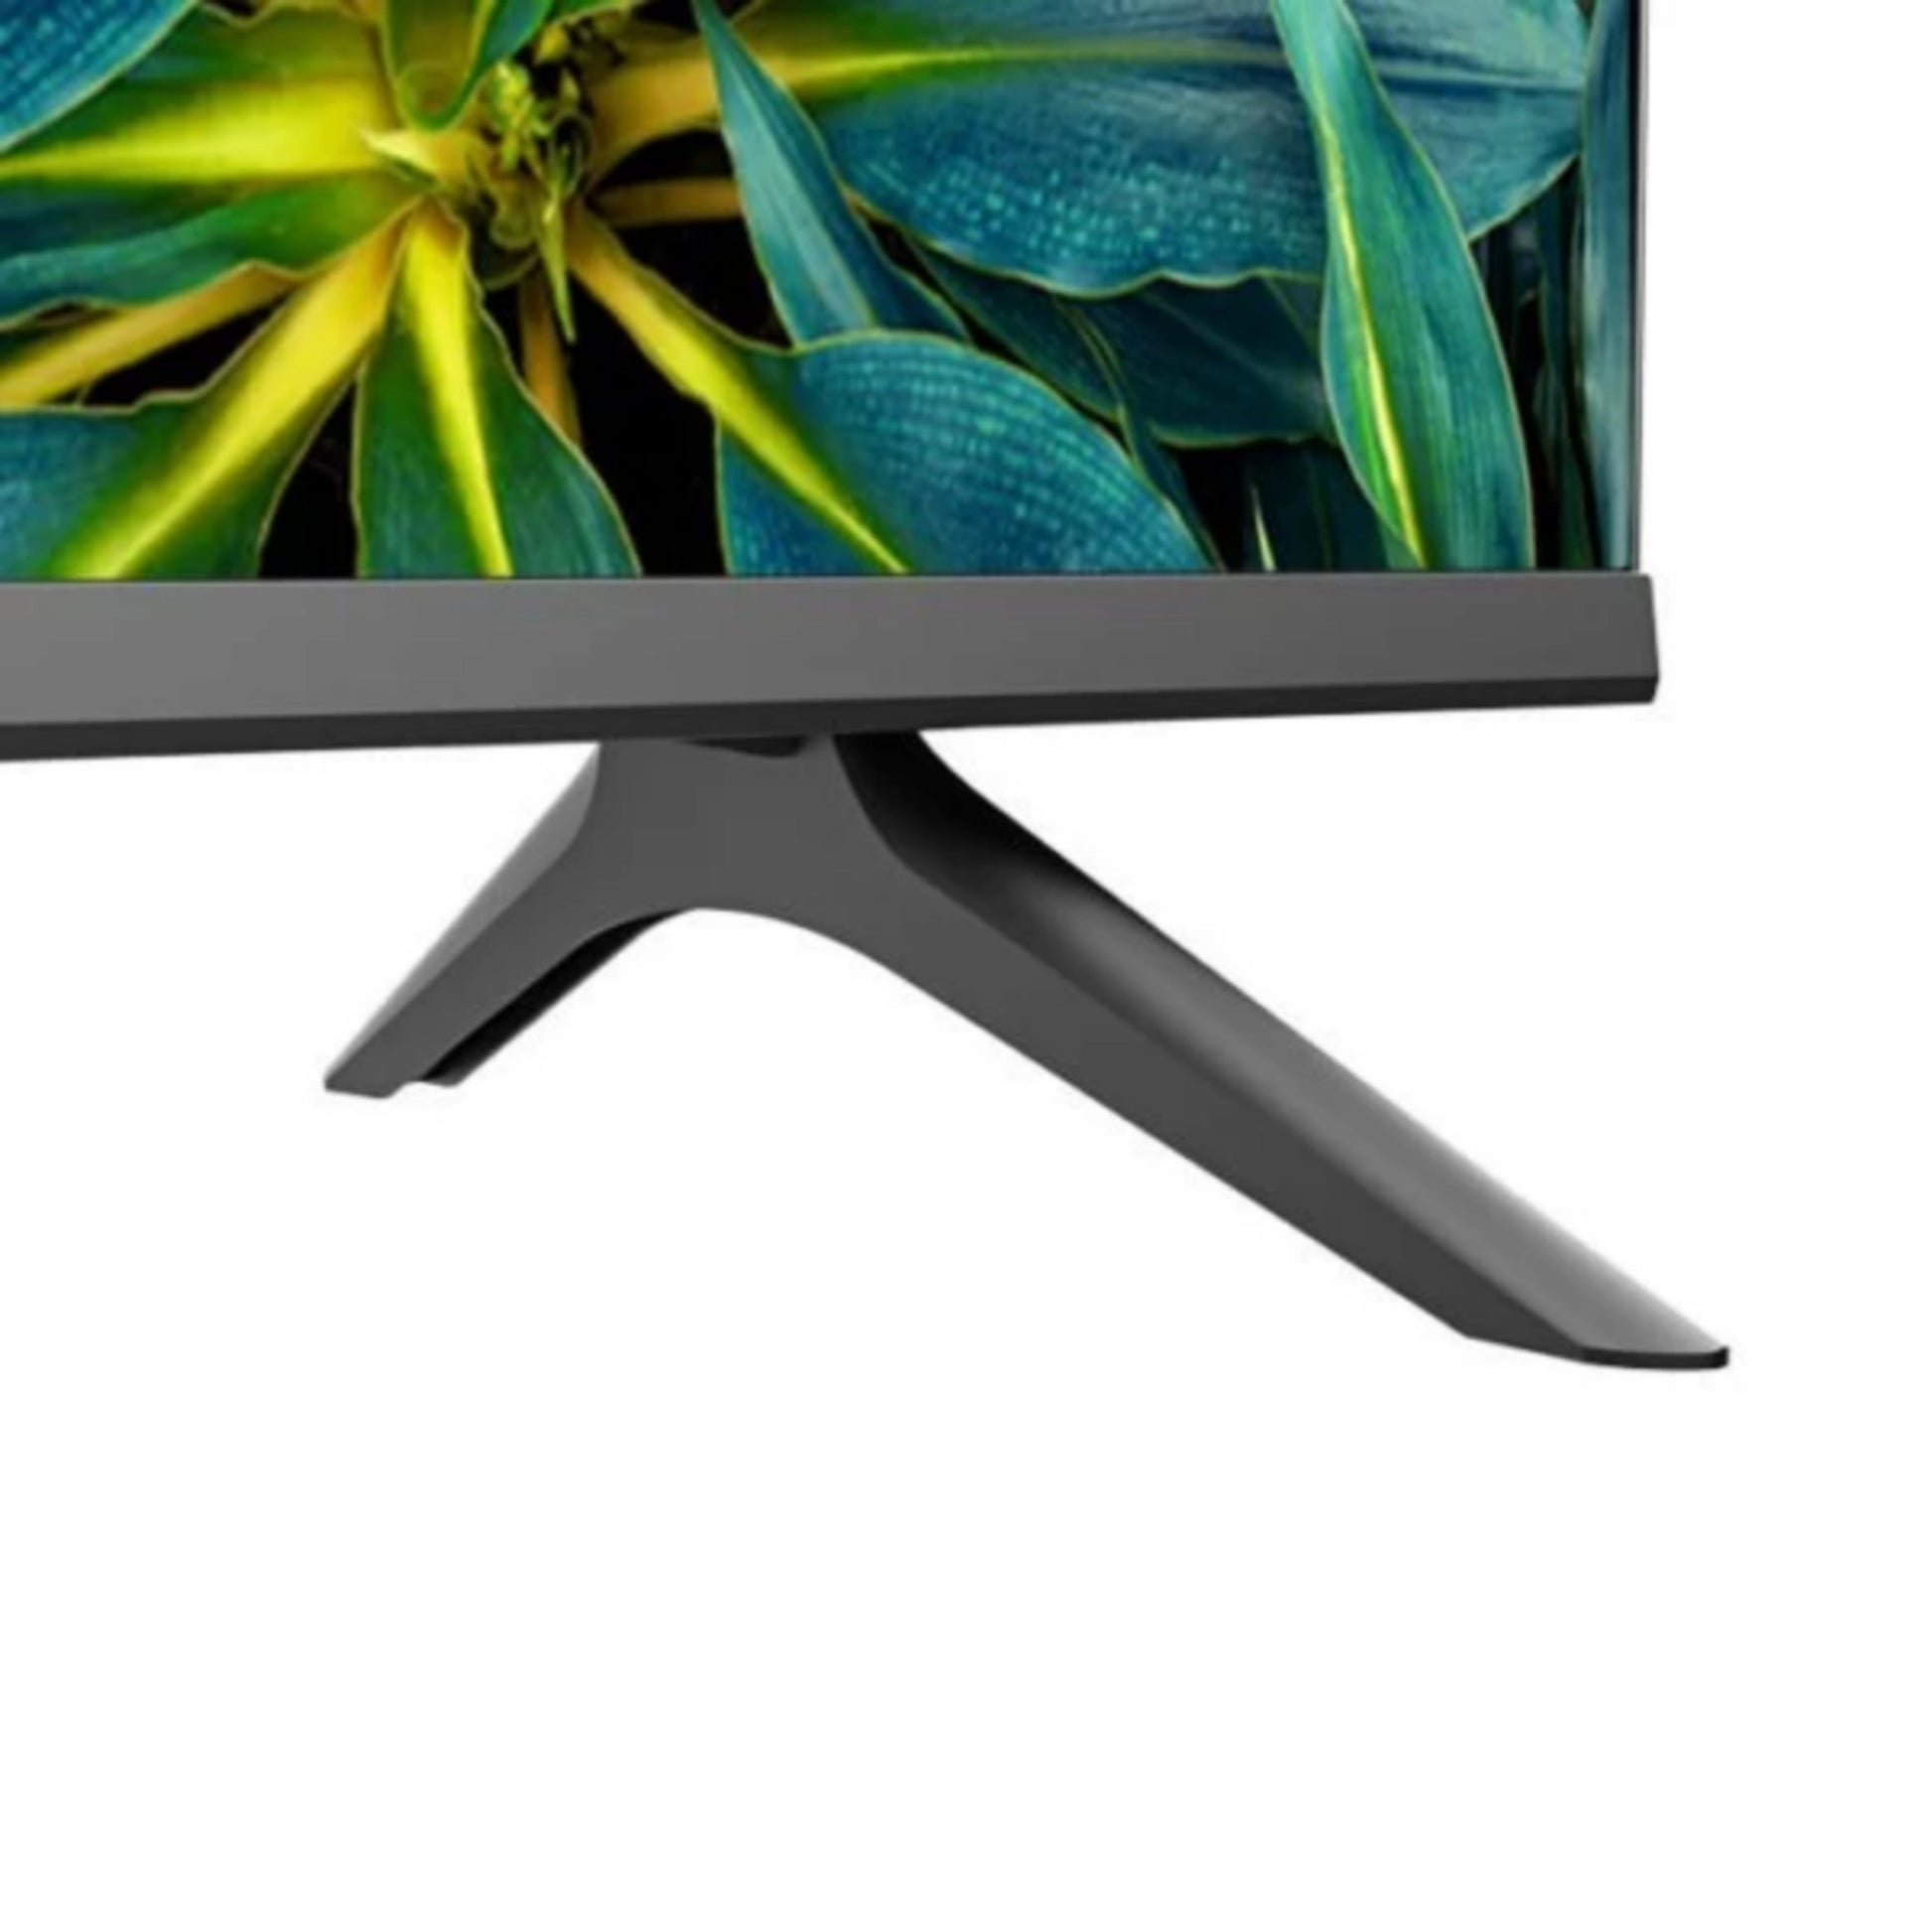 Hisense 43 Inch A5100 Series HD LED TV (Free Wall Mount) - table stand view